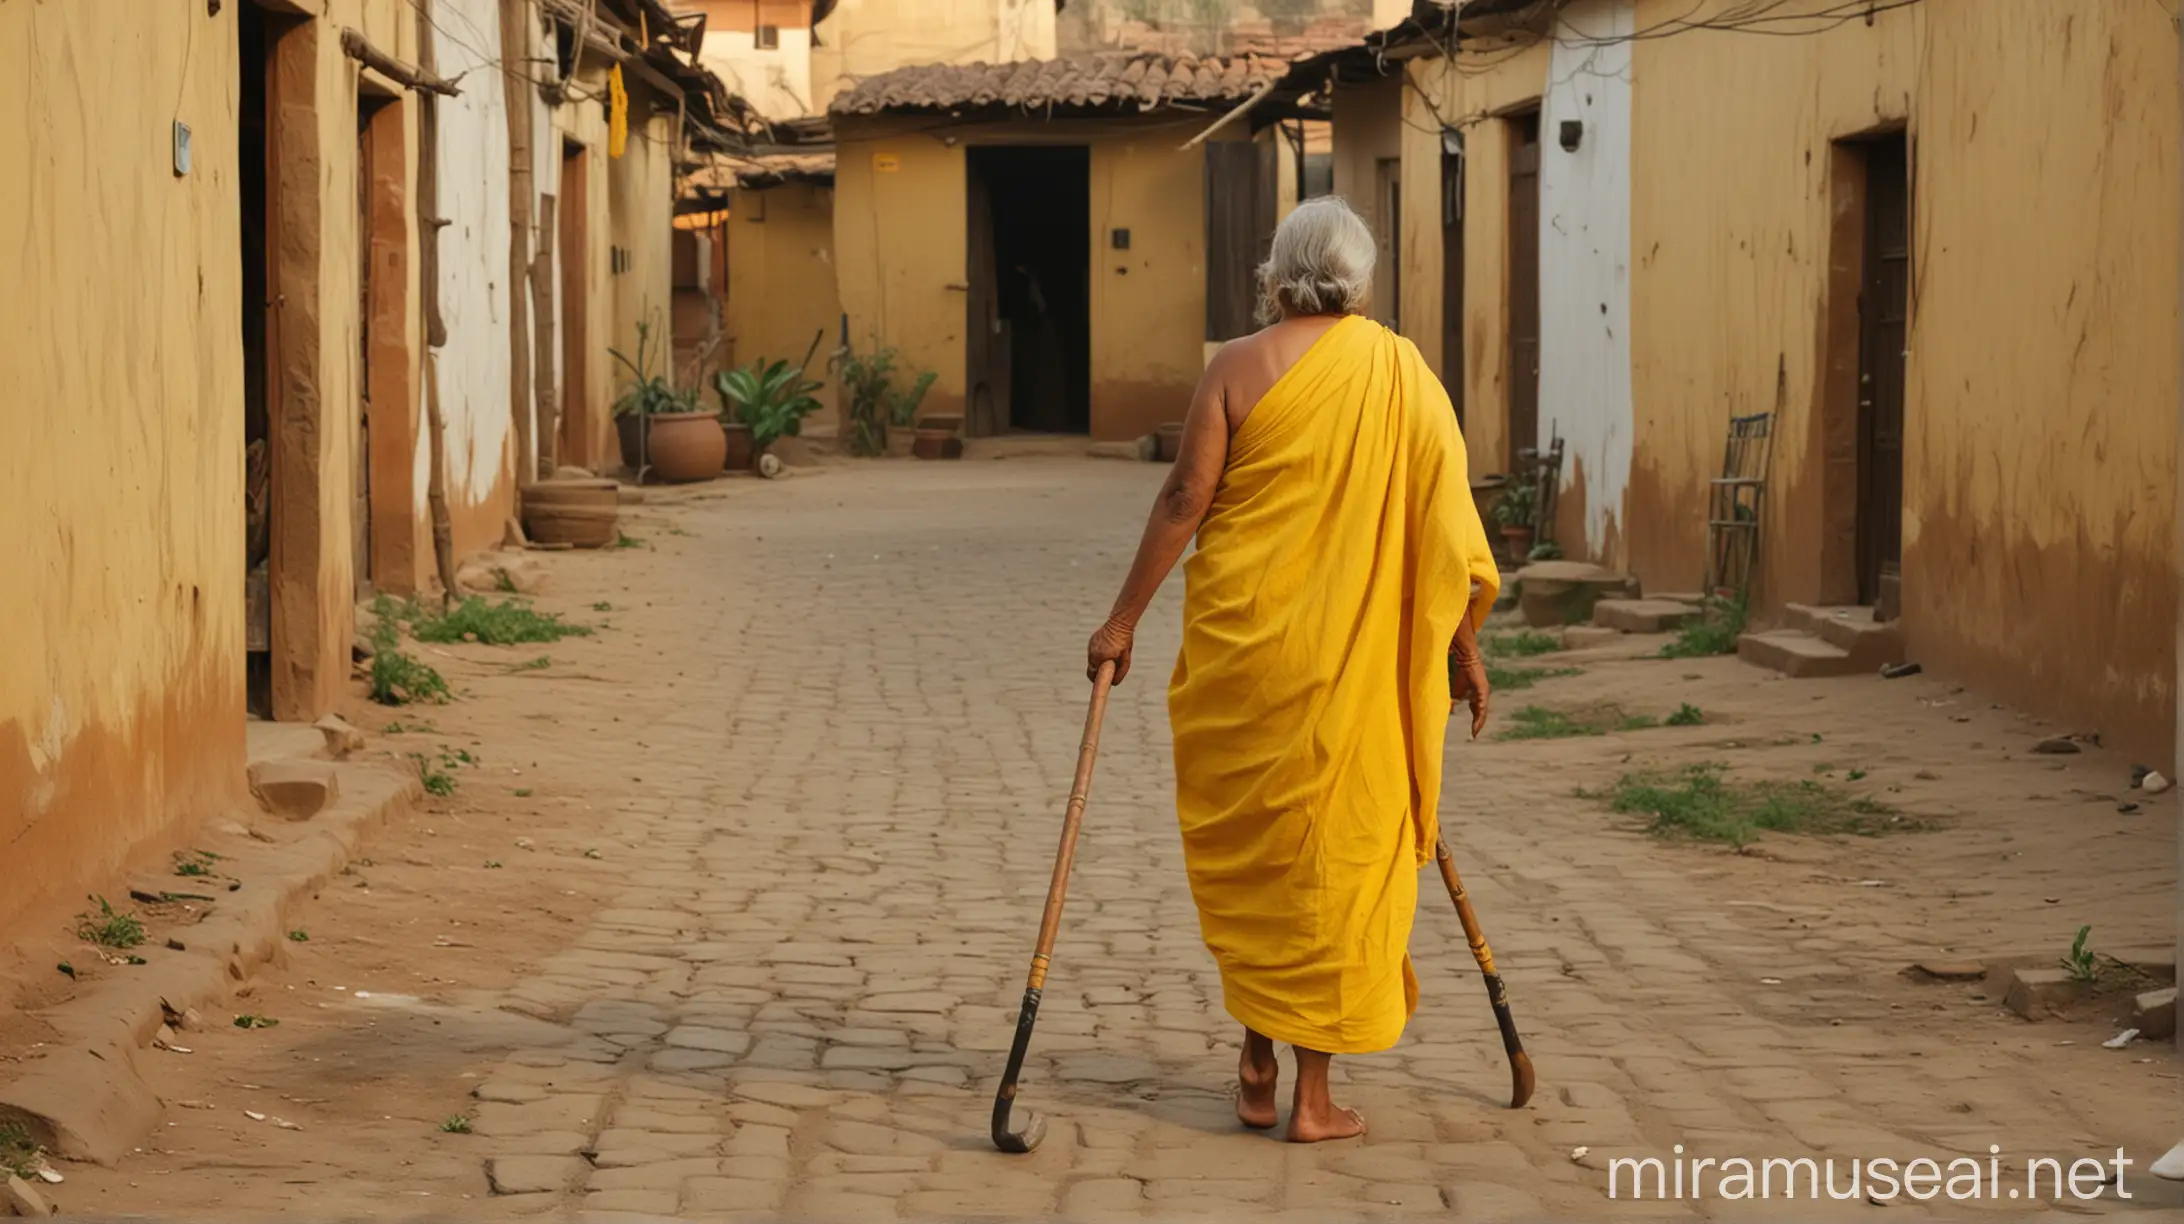 Elderly Indian Woman Walking with Cane at Dusk in Village Courtyard